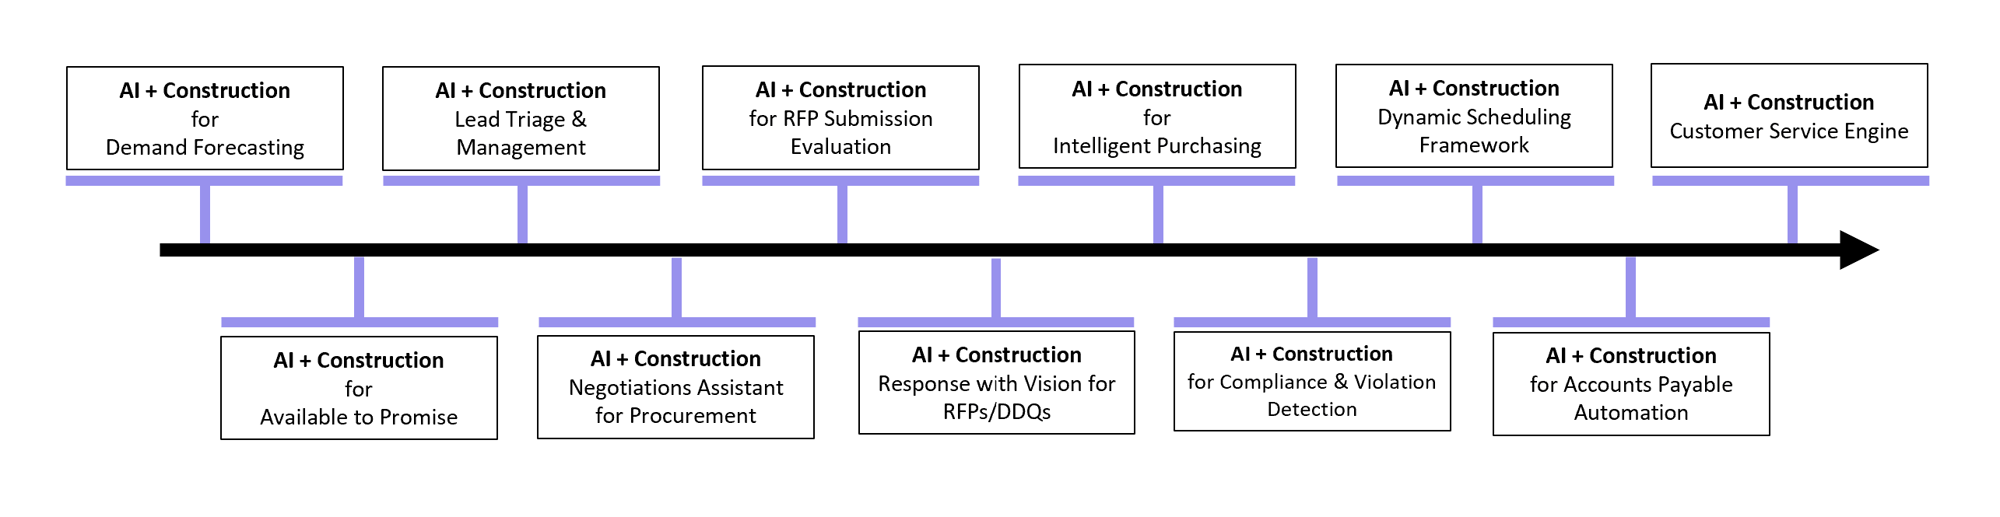 ConstructOps Potential Template Journey Timeline3